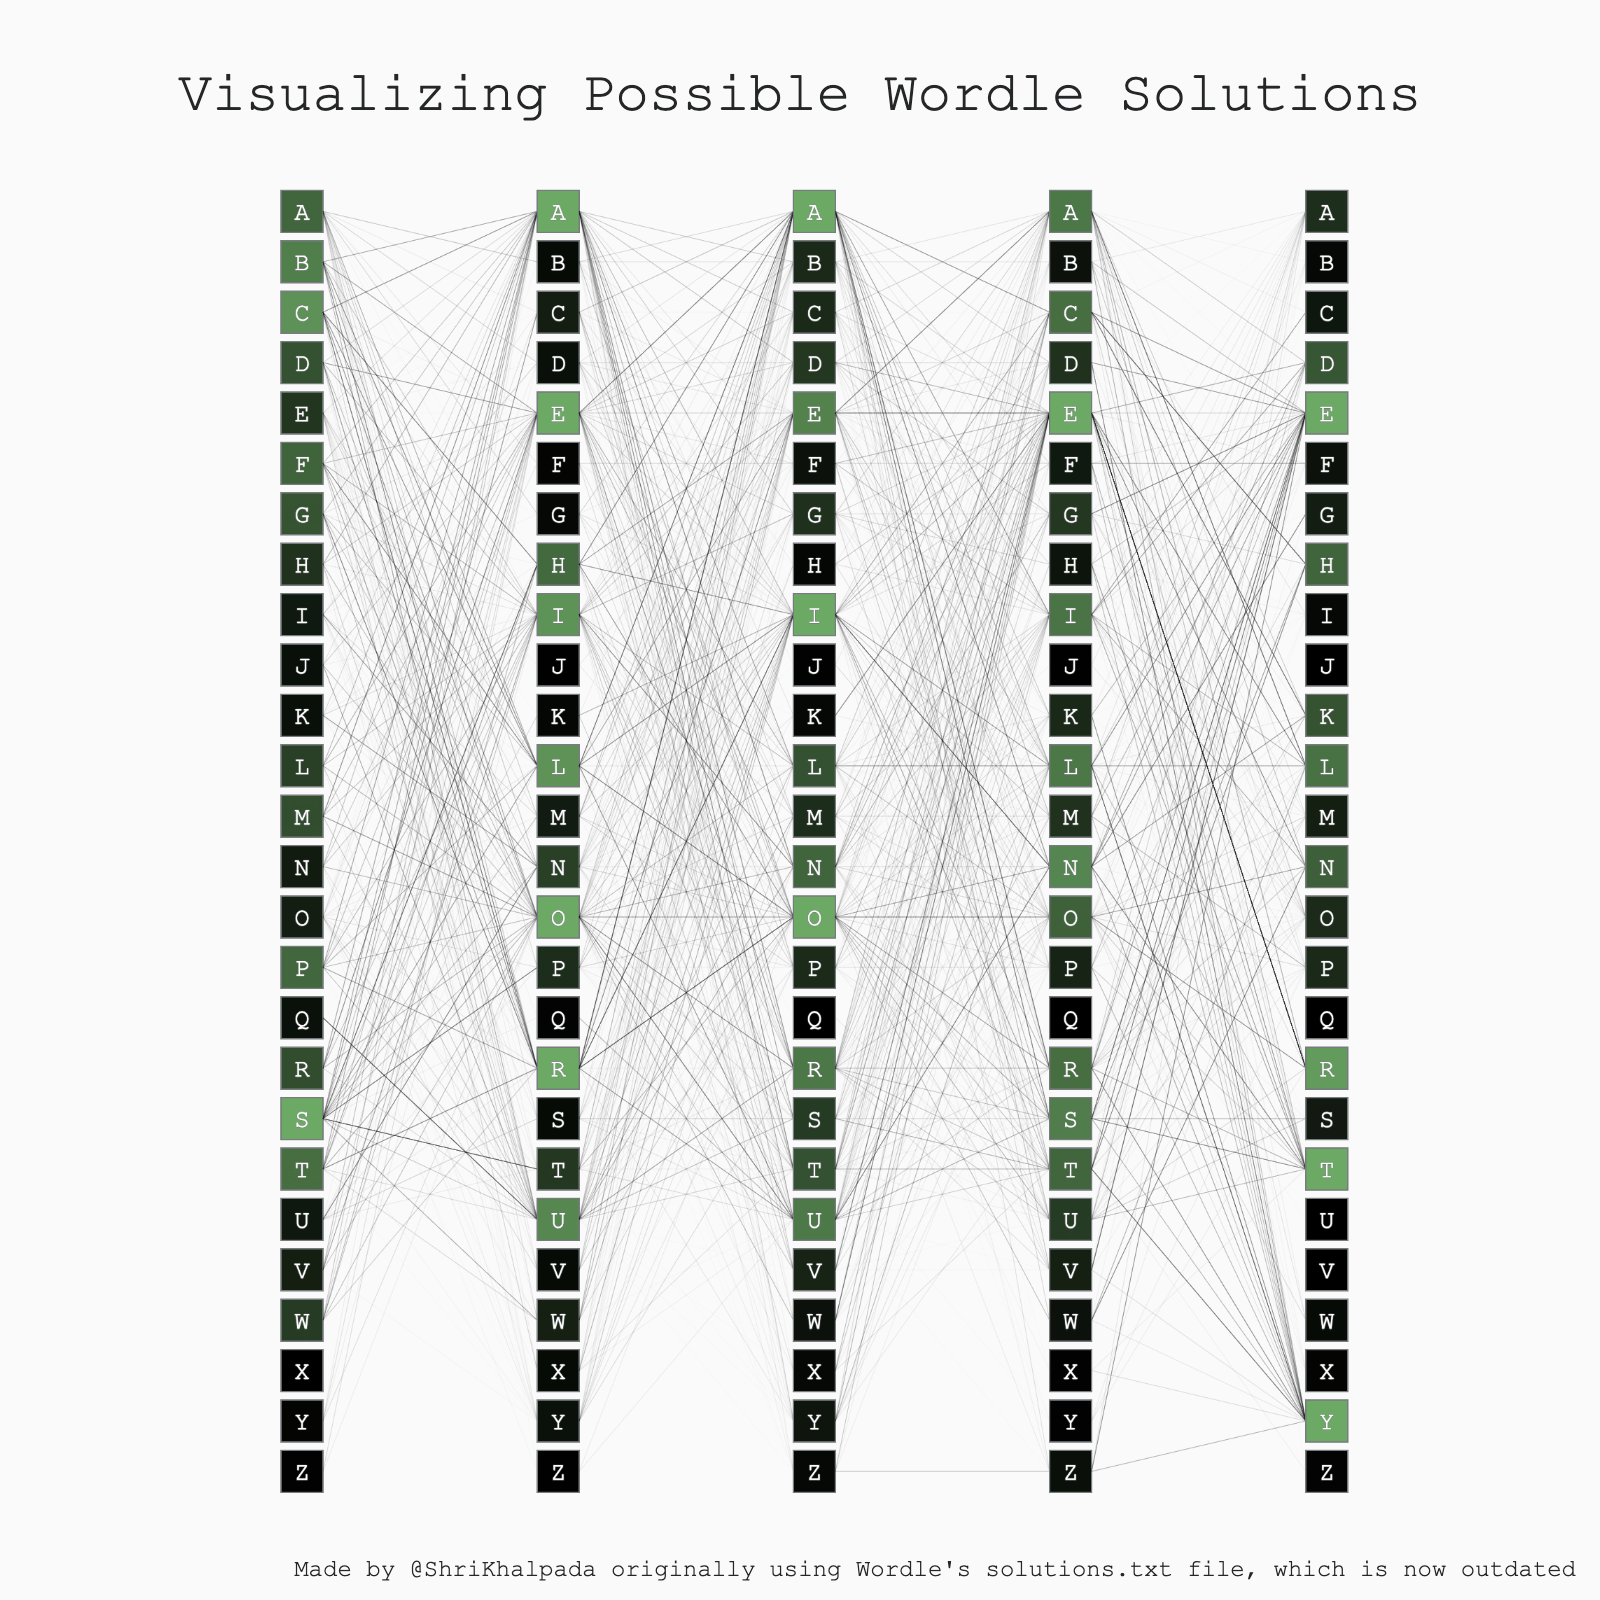 A complex network diagram titled "Visualizing Possible Wordle Solutions" displaying potential letter combinations across multiple columns, interconnected by lines to show progression of guesses.